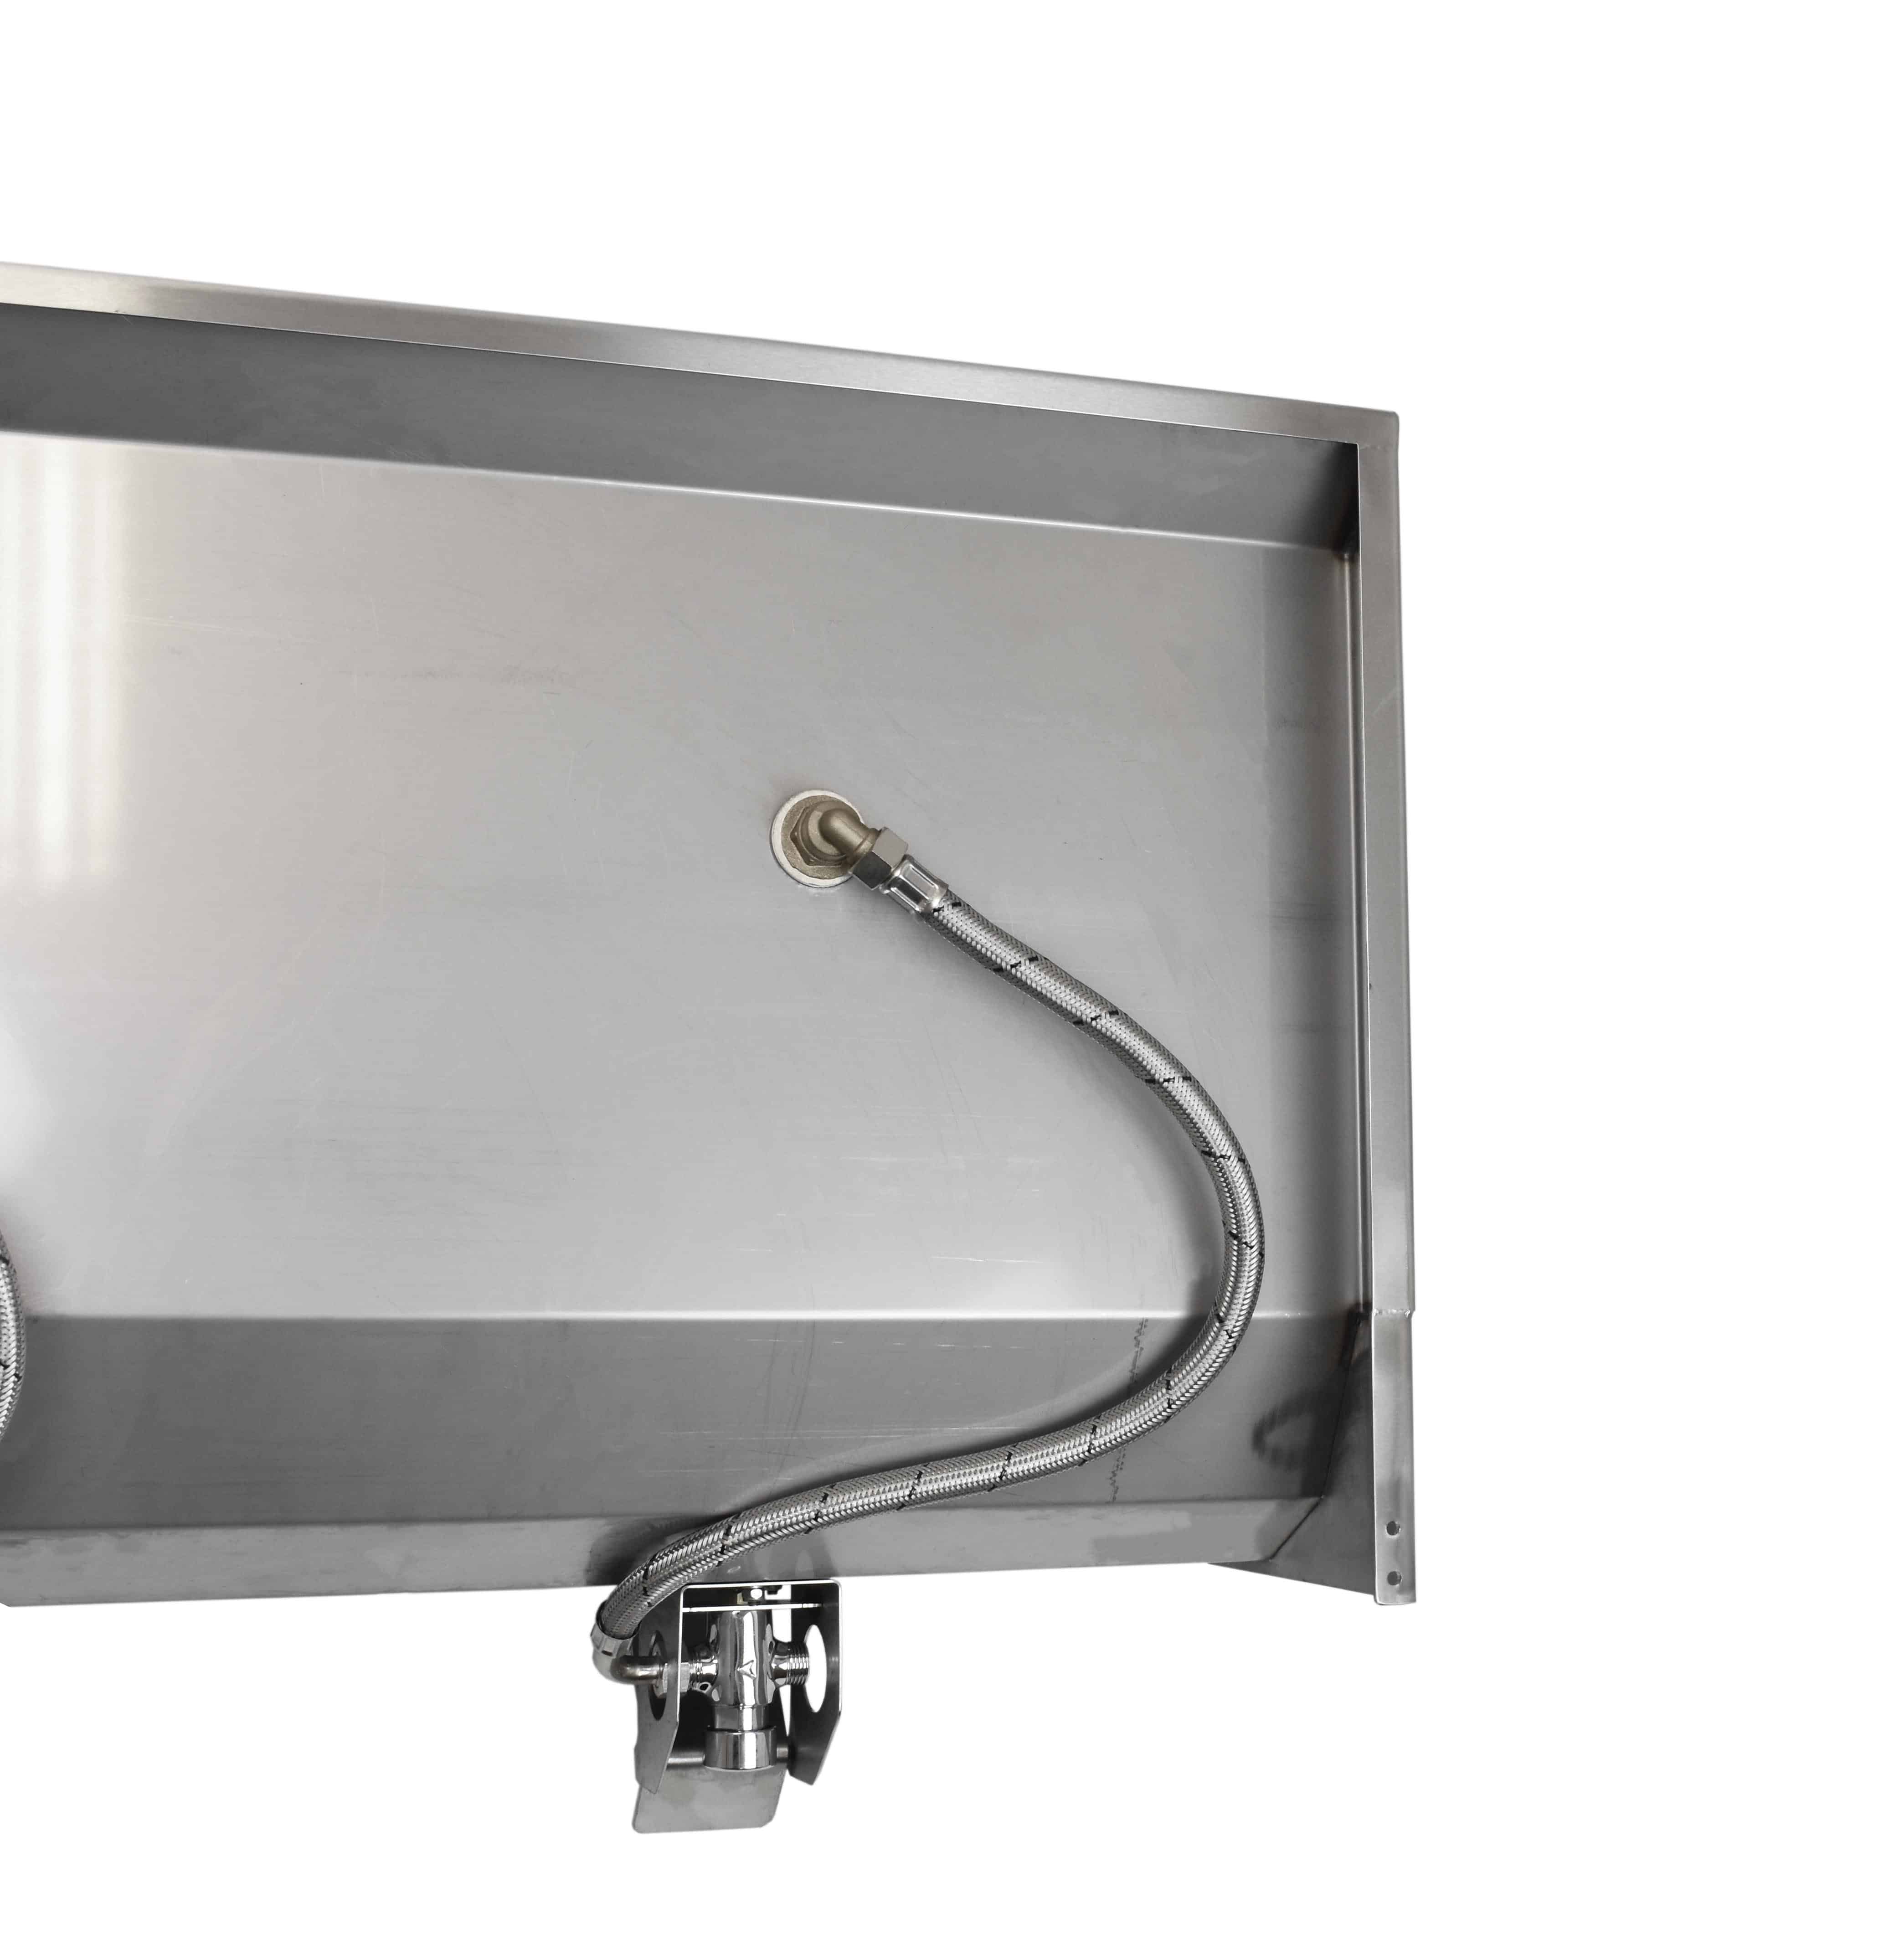 Stainless steel two station knee operated wash trough